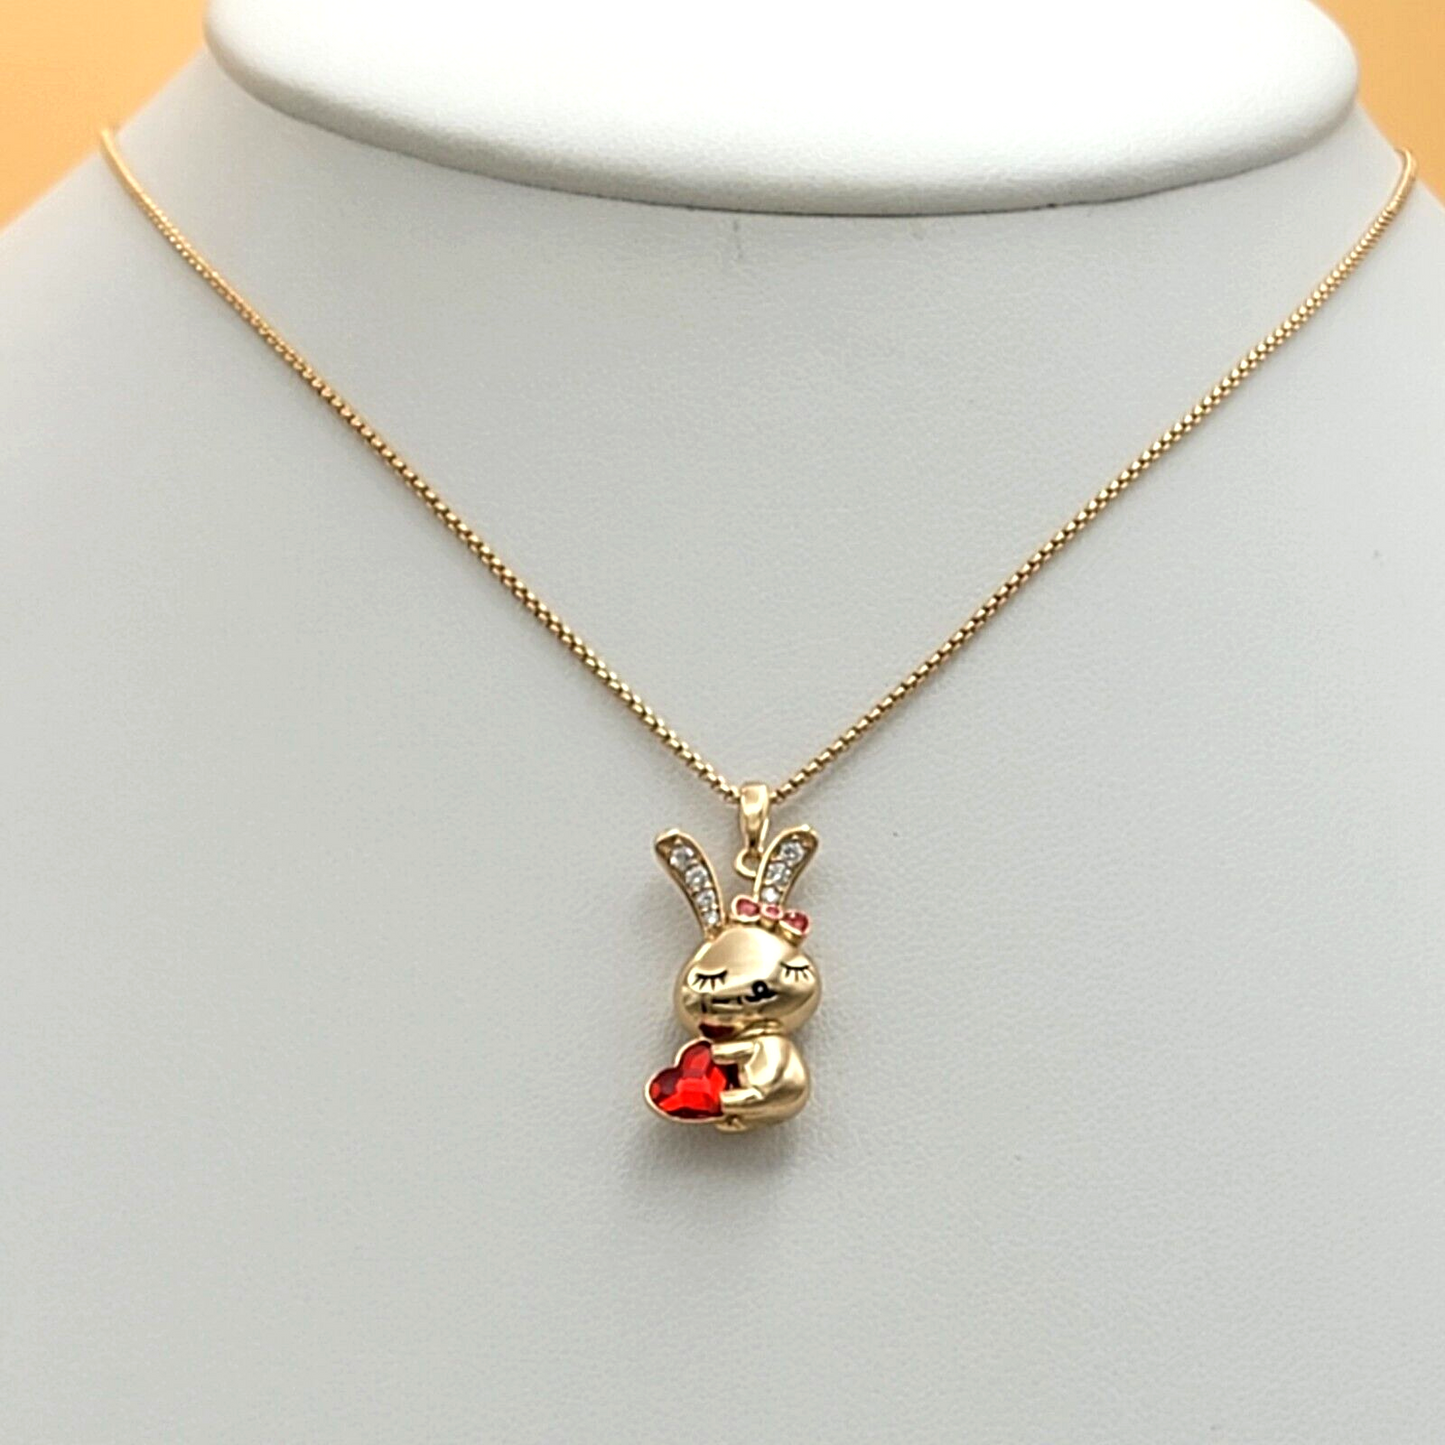 Necklaces - 18K Gold Plated. Rabbit Bunny Pendant & Chain - Red Heart Crystal Bow